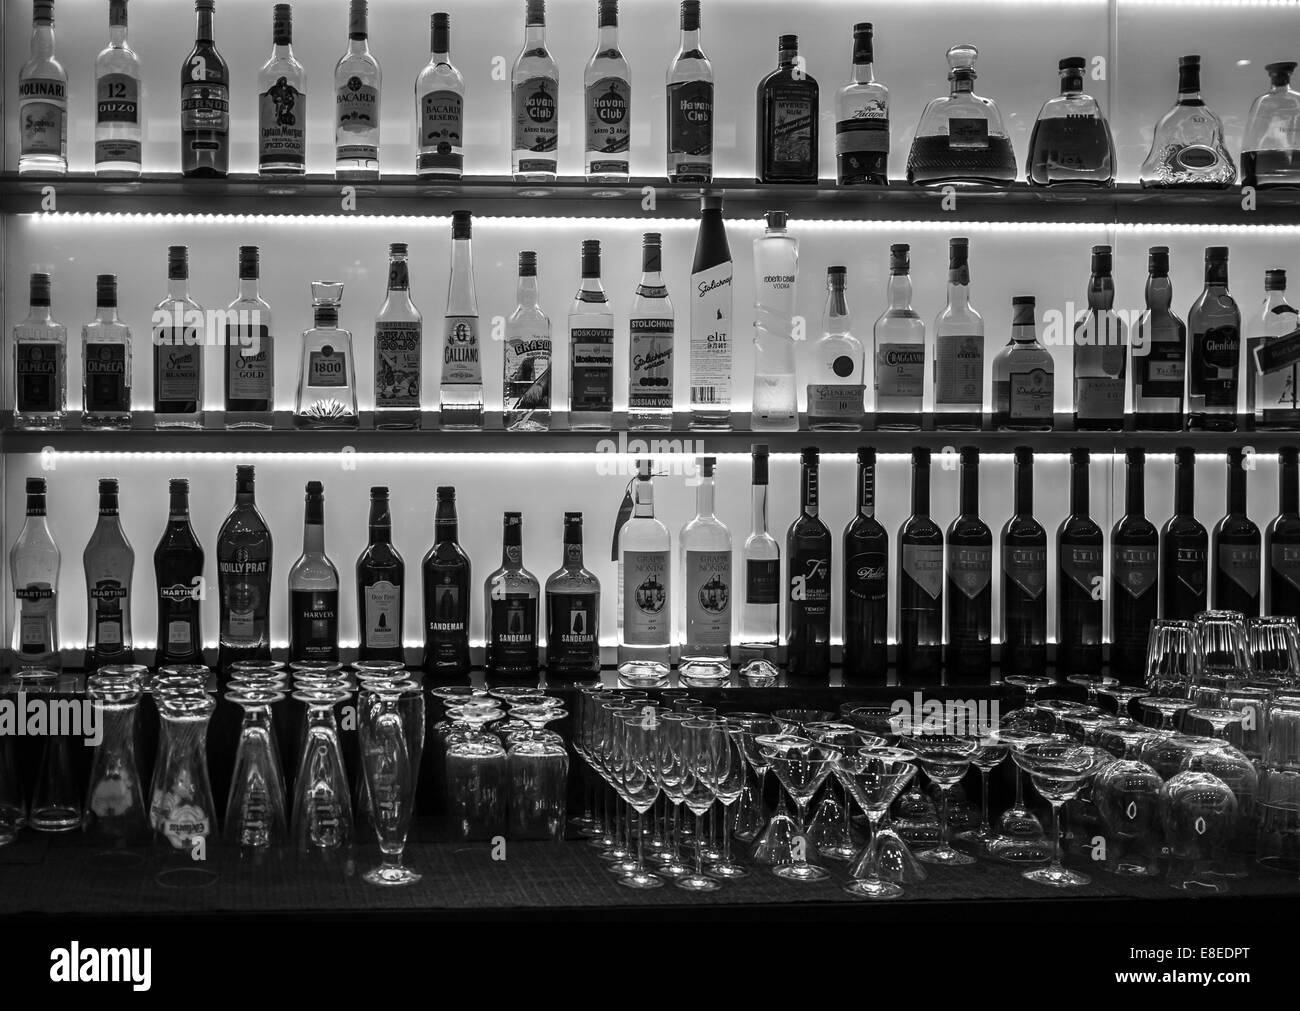 Bottles of wine, liquor and spirits as well as glasses on a back lit bar. Stock Photo